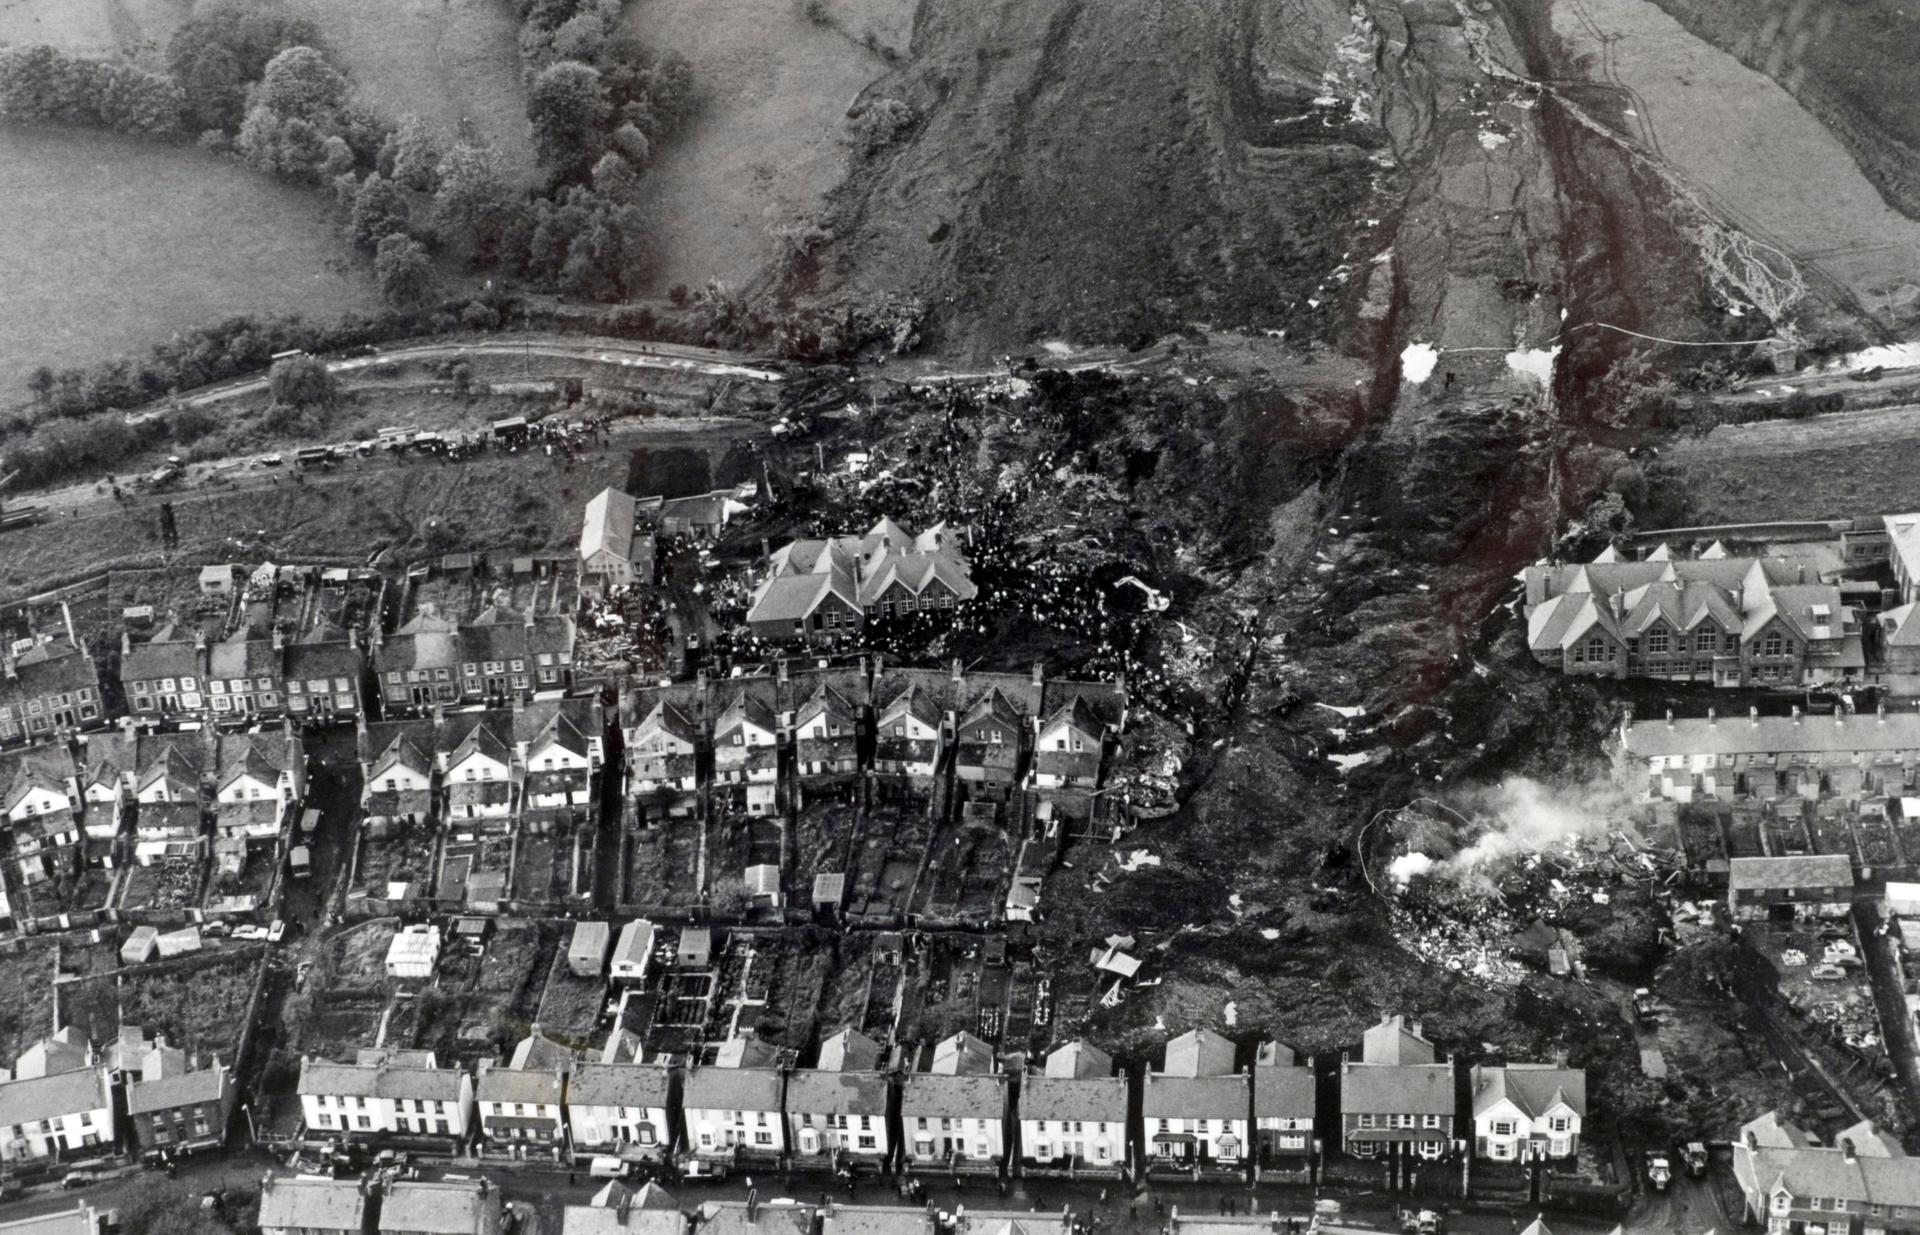 Aberfan disaster kills 144 people and levels a Welsh mining village